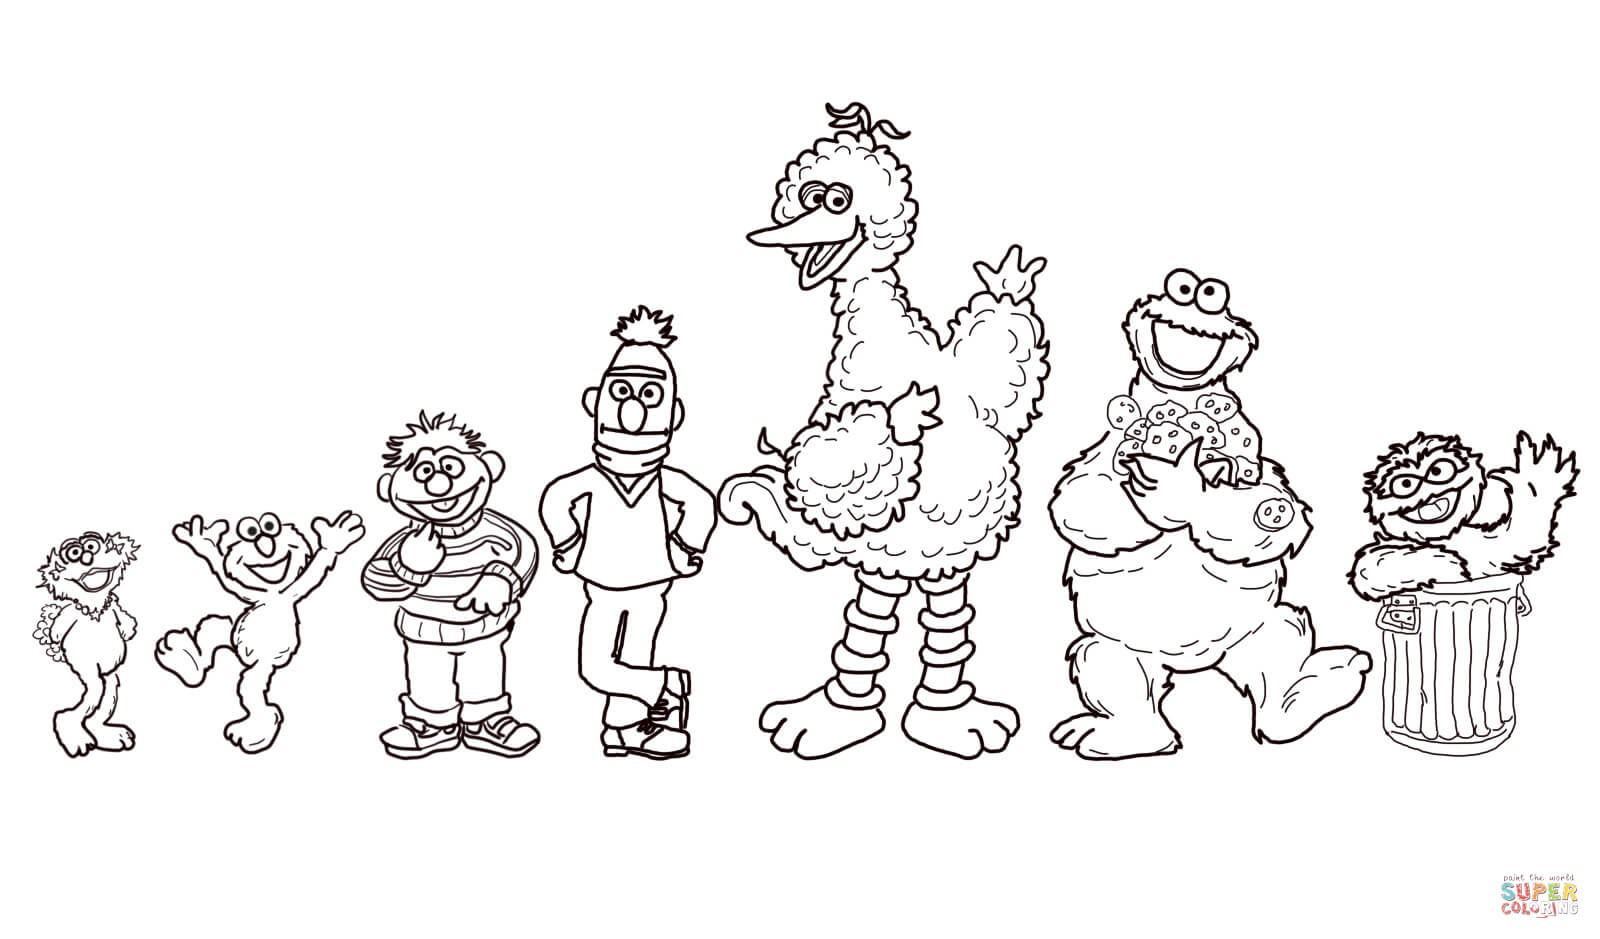 Sesame street characters coloring page free printable coloring pages